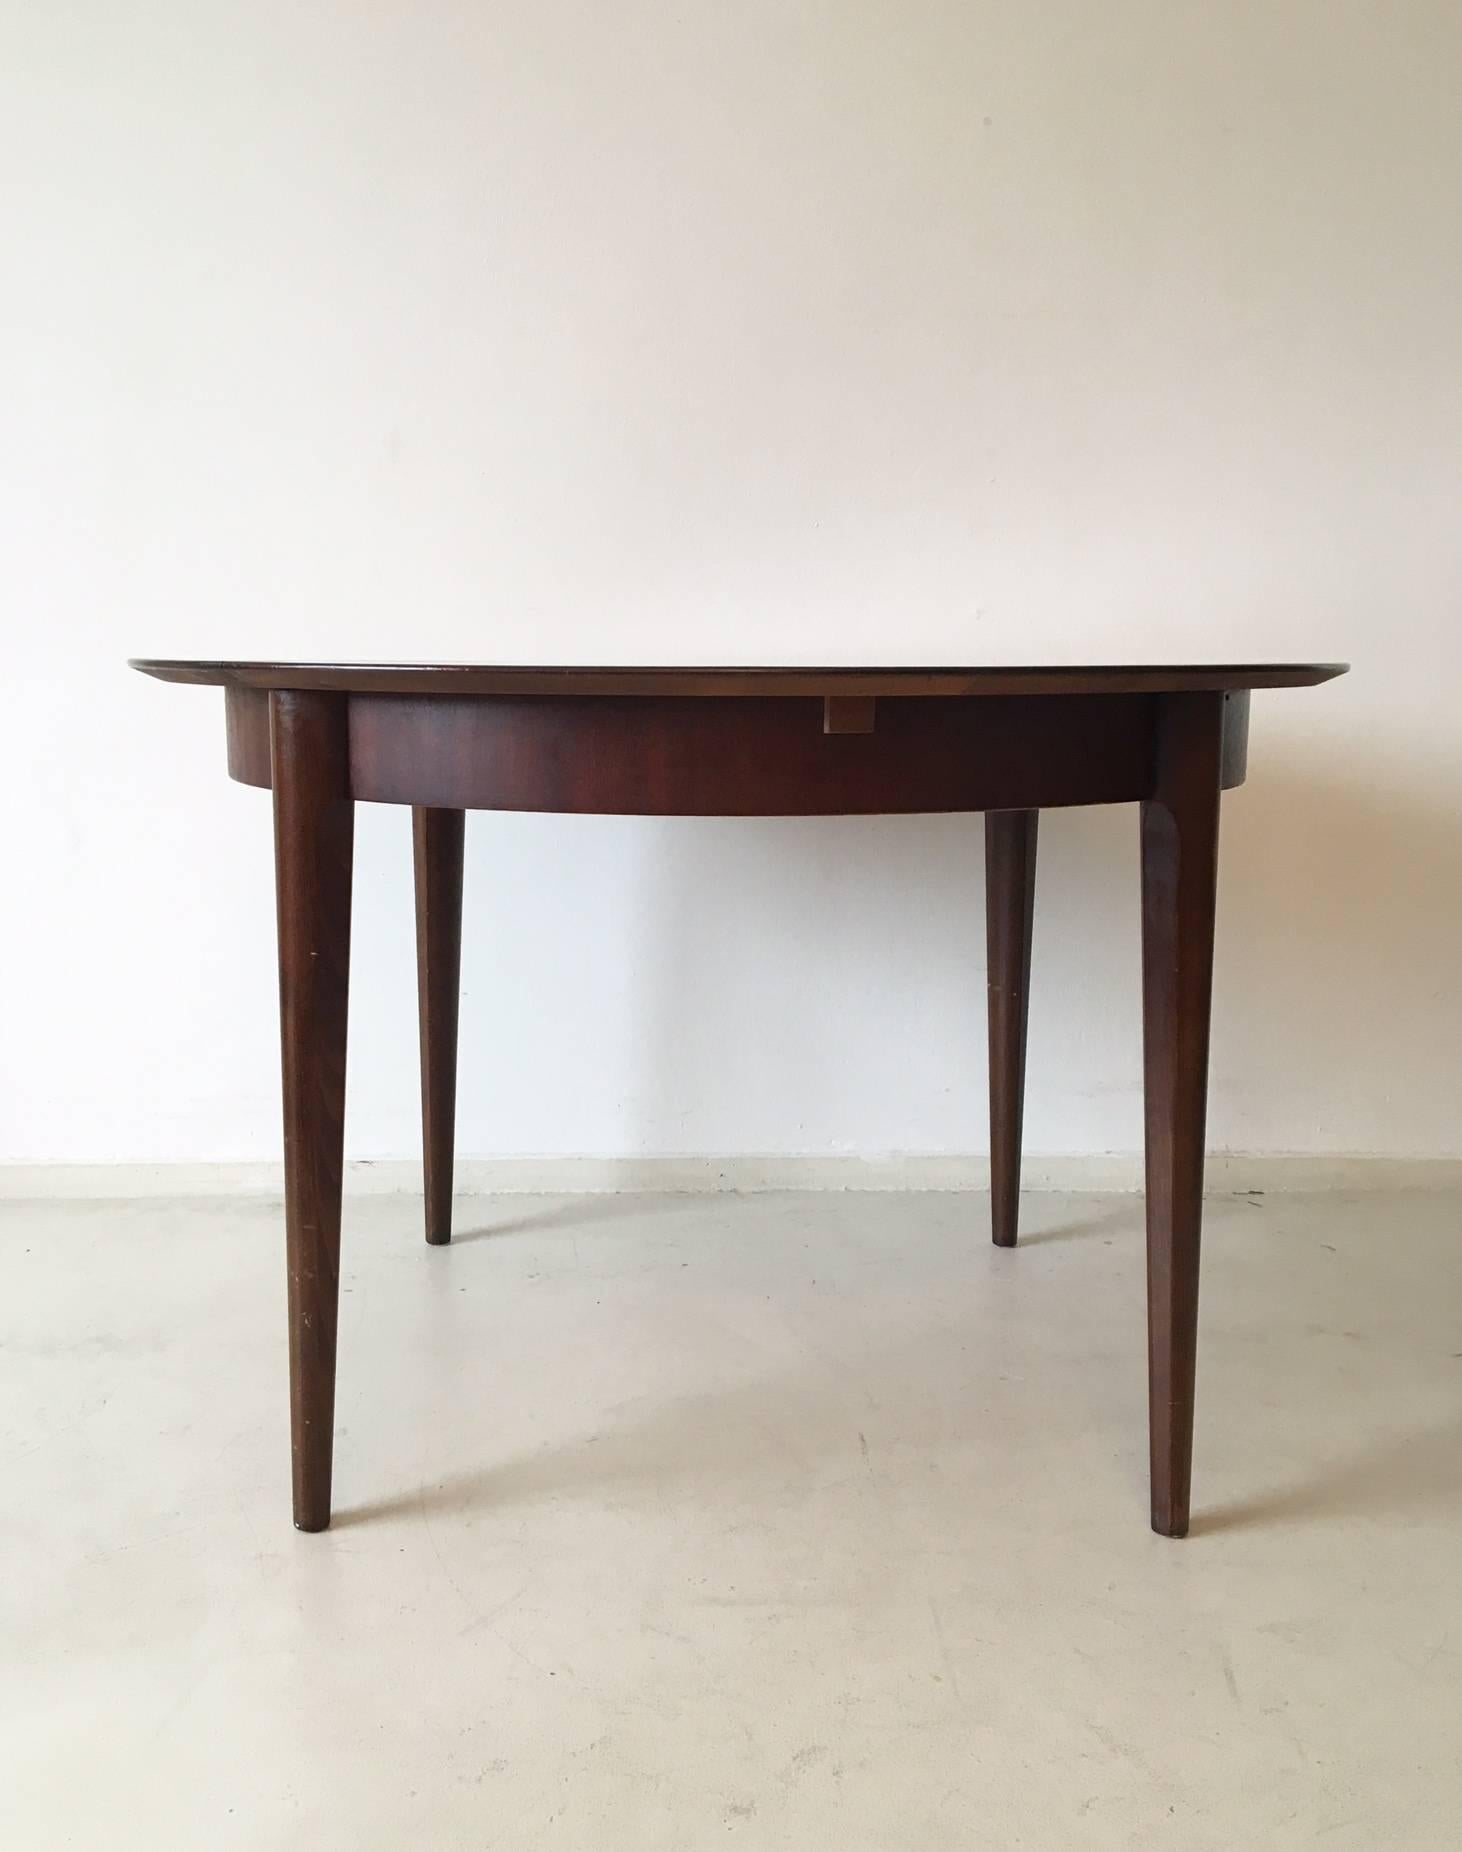 This wonderful extendable dining table was designed and manufactured by Lubke in Germany during the 1960s. It features a frame in wood with a Mahogany colored veneer. It's feet are made of solid wood and are slightly tapered, also they are